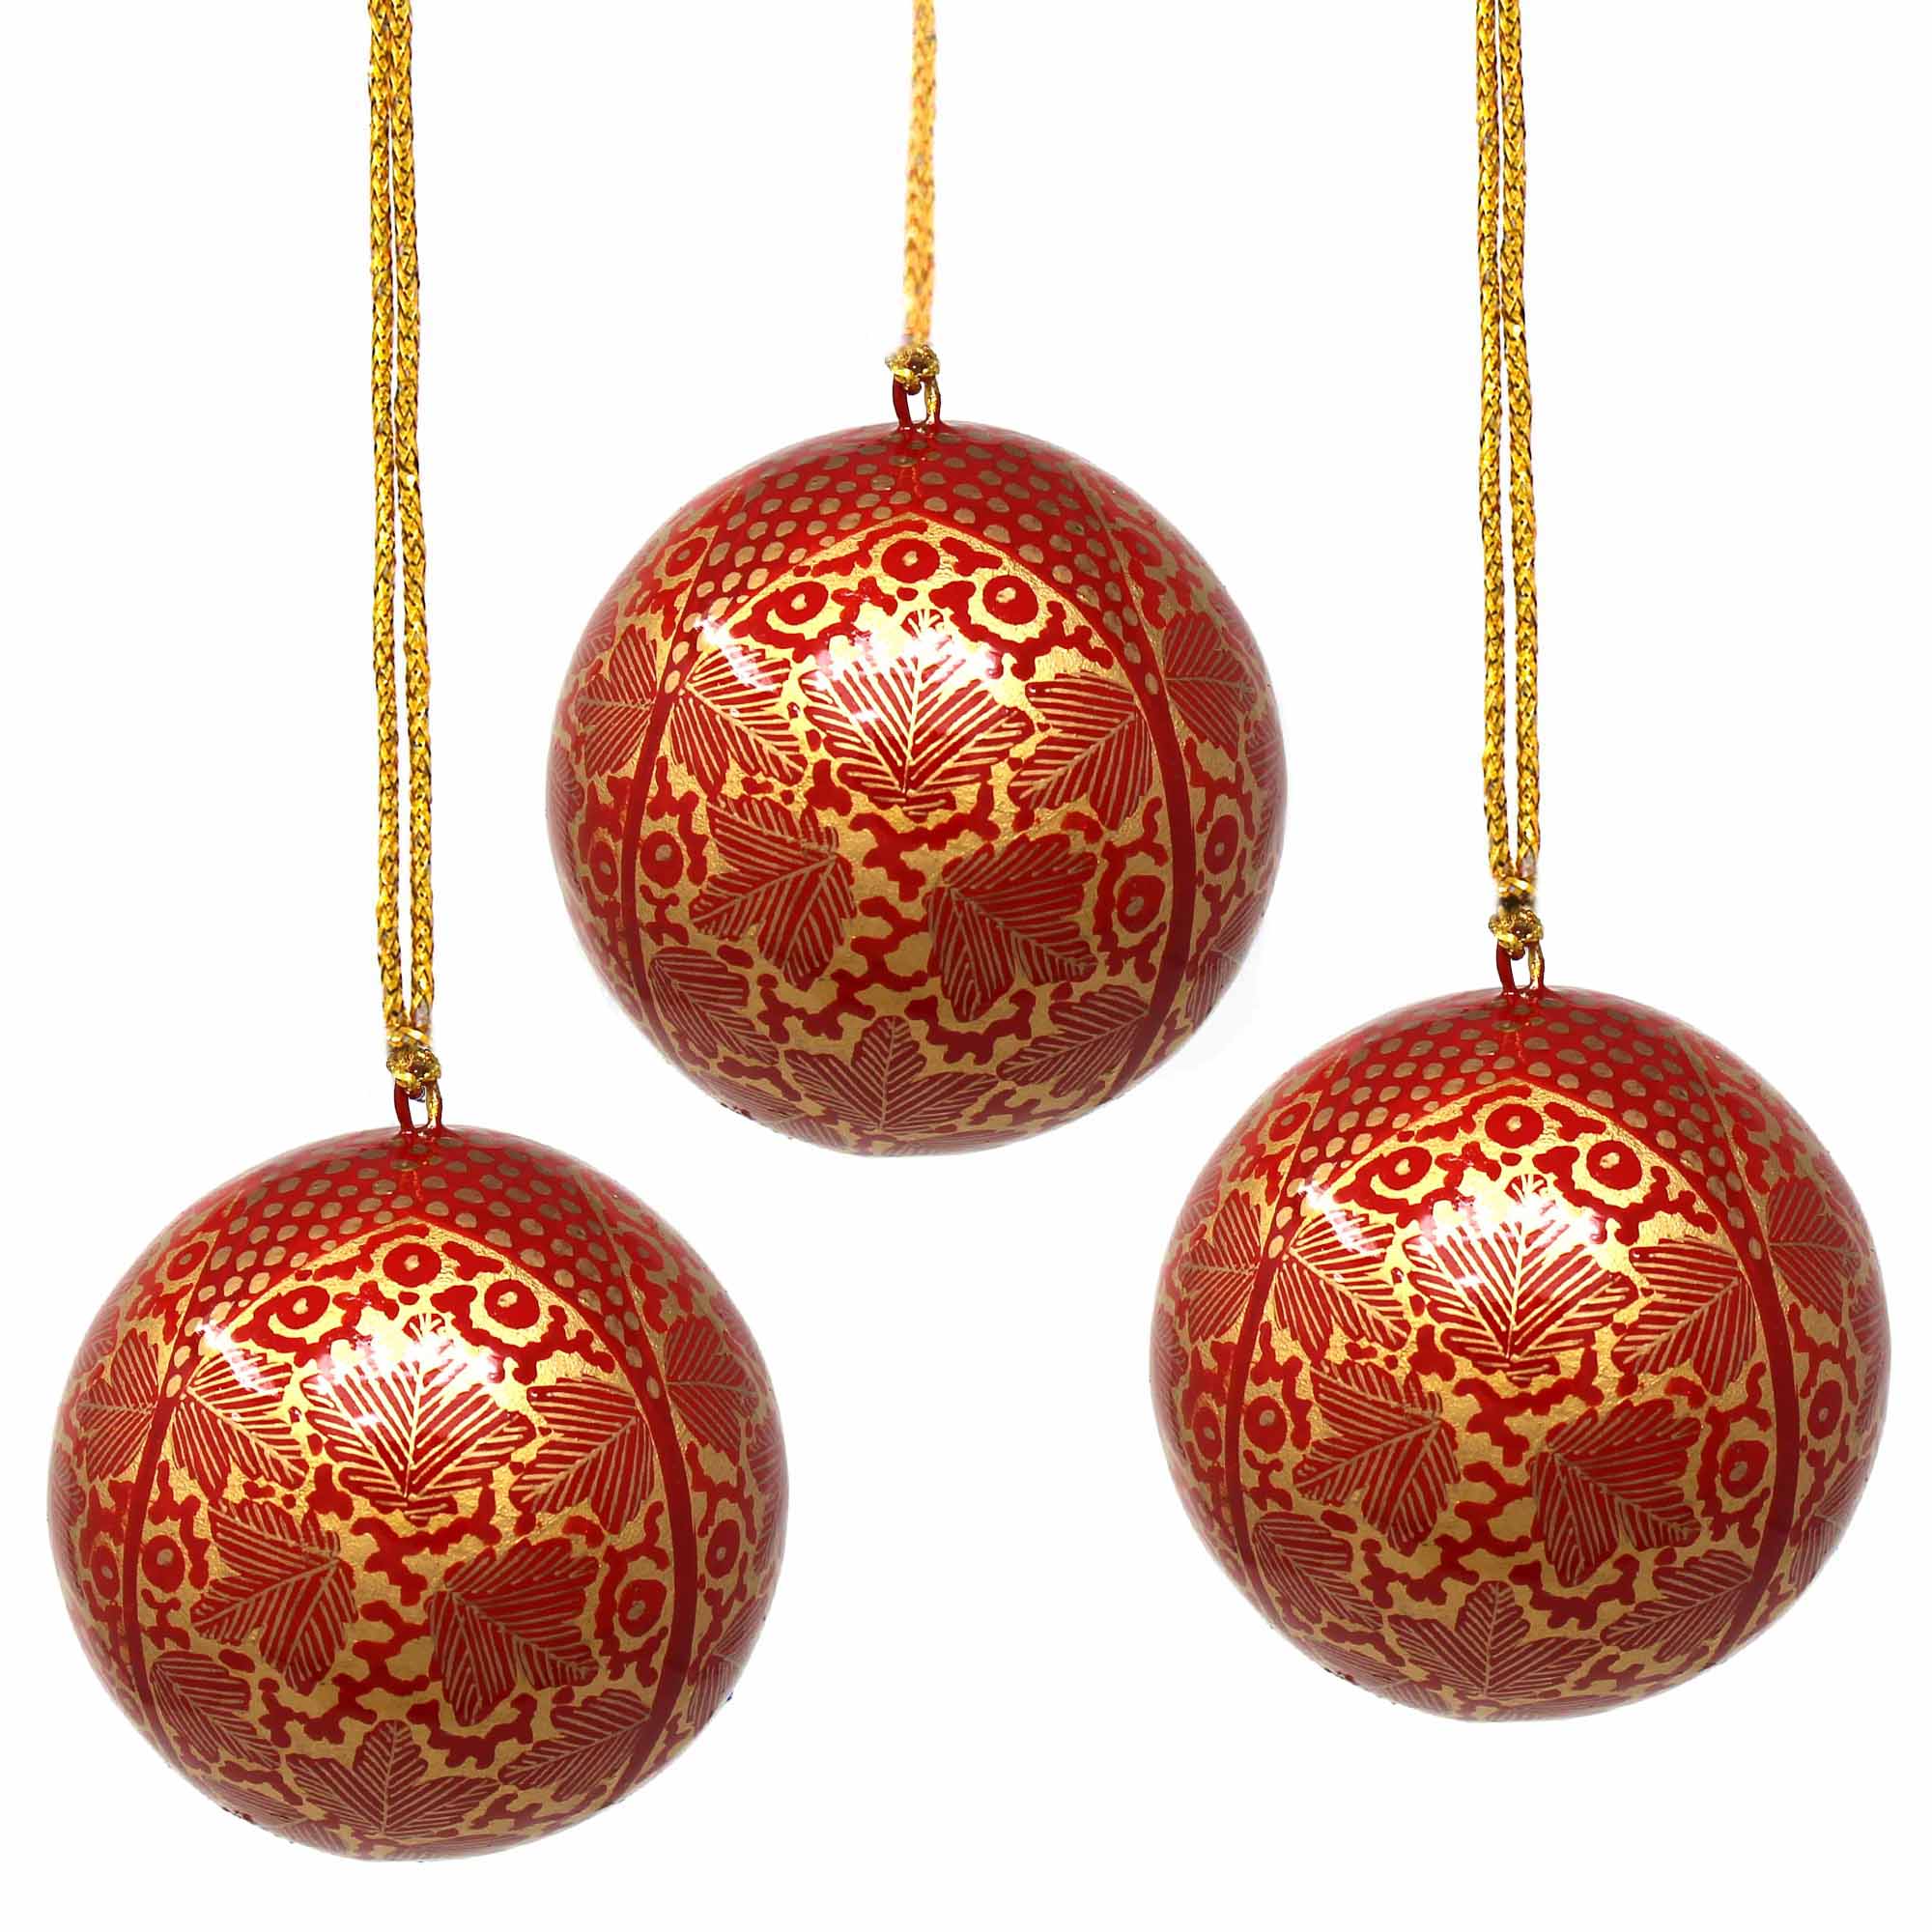 Handpainted Ornaments, Gold Chinar Leaves - Pack of 3